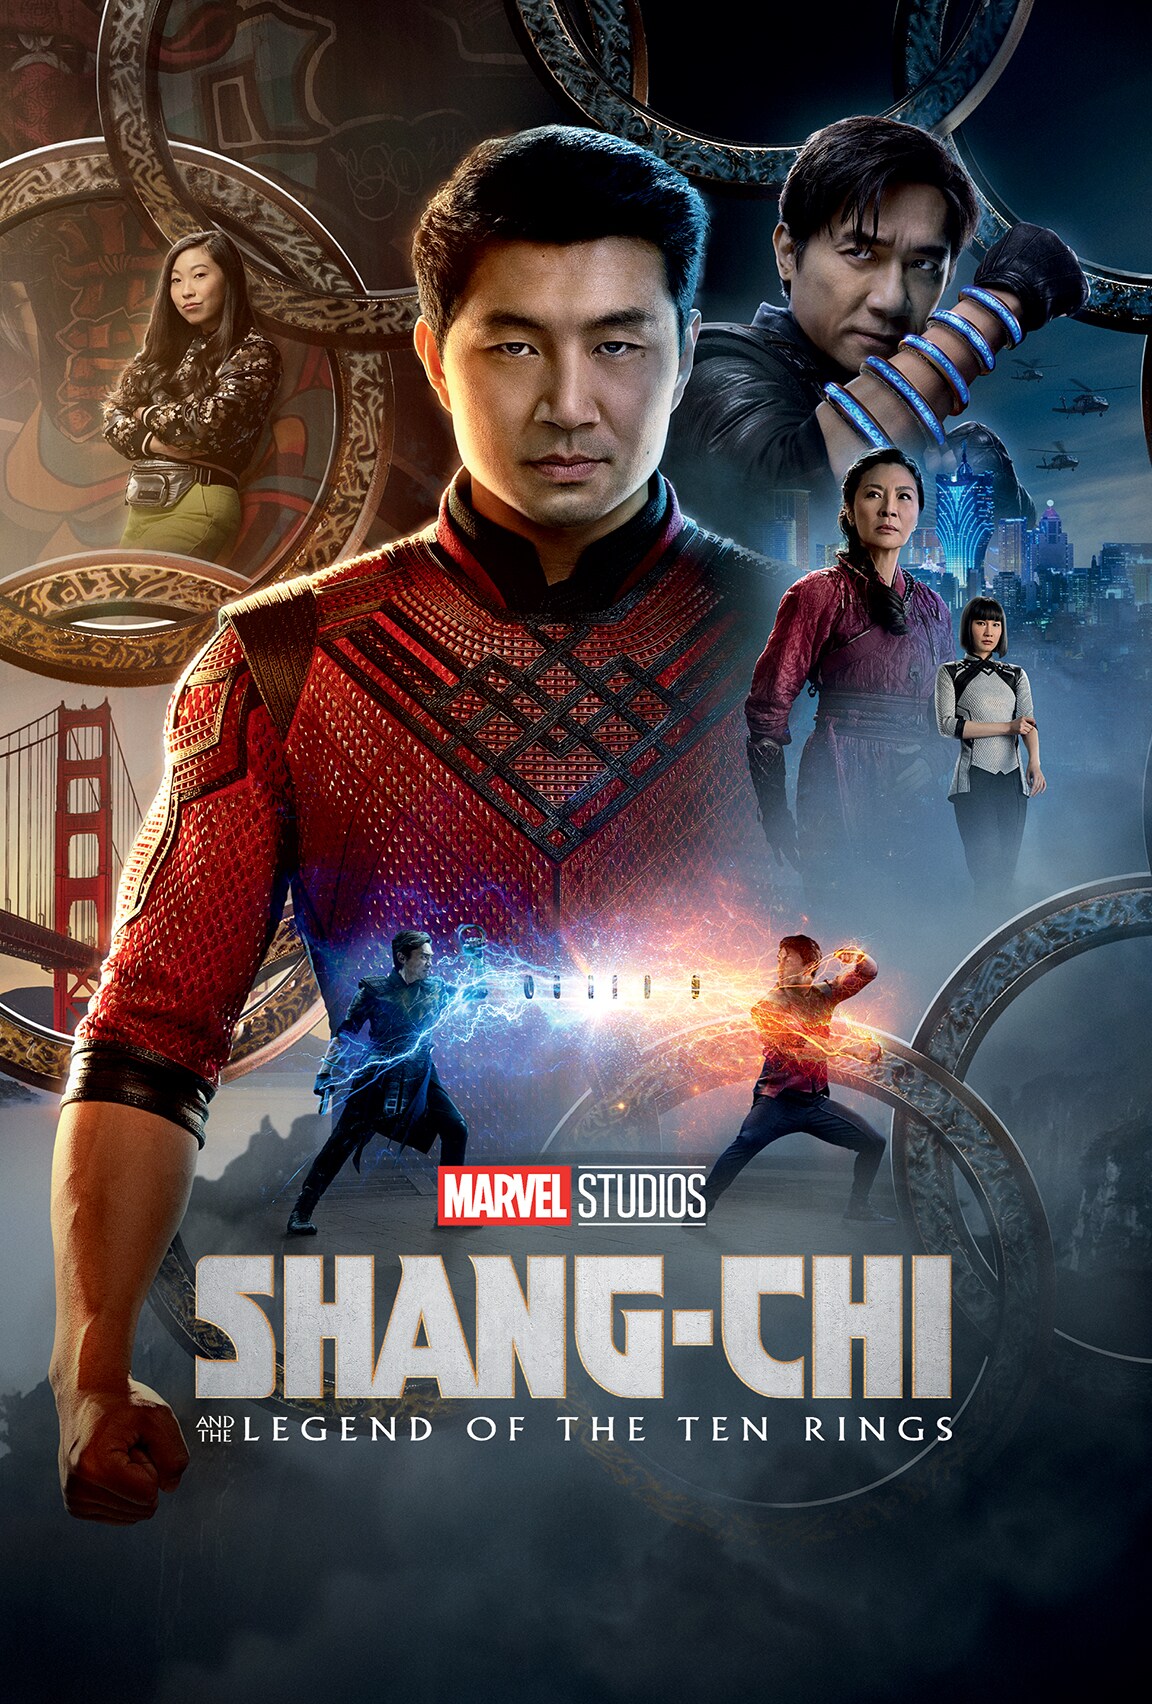 Marvel Studios' Shang-Chi and The Legend of The Ten Rings on Disney Plus